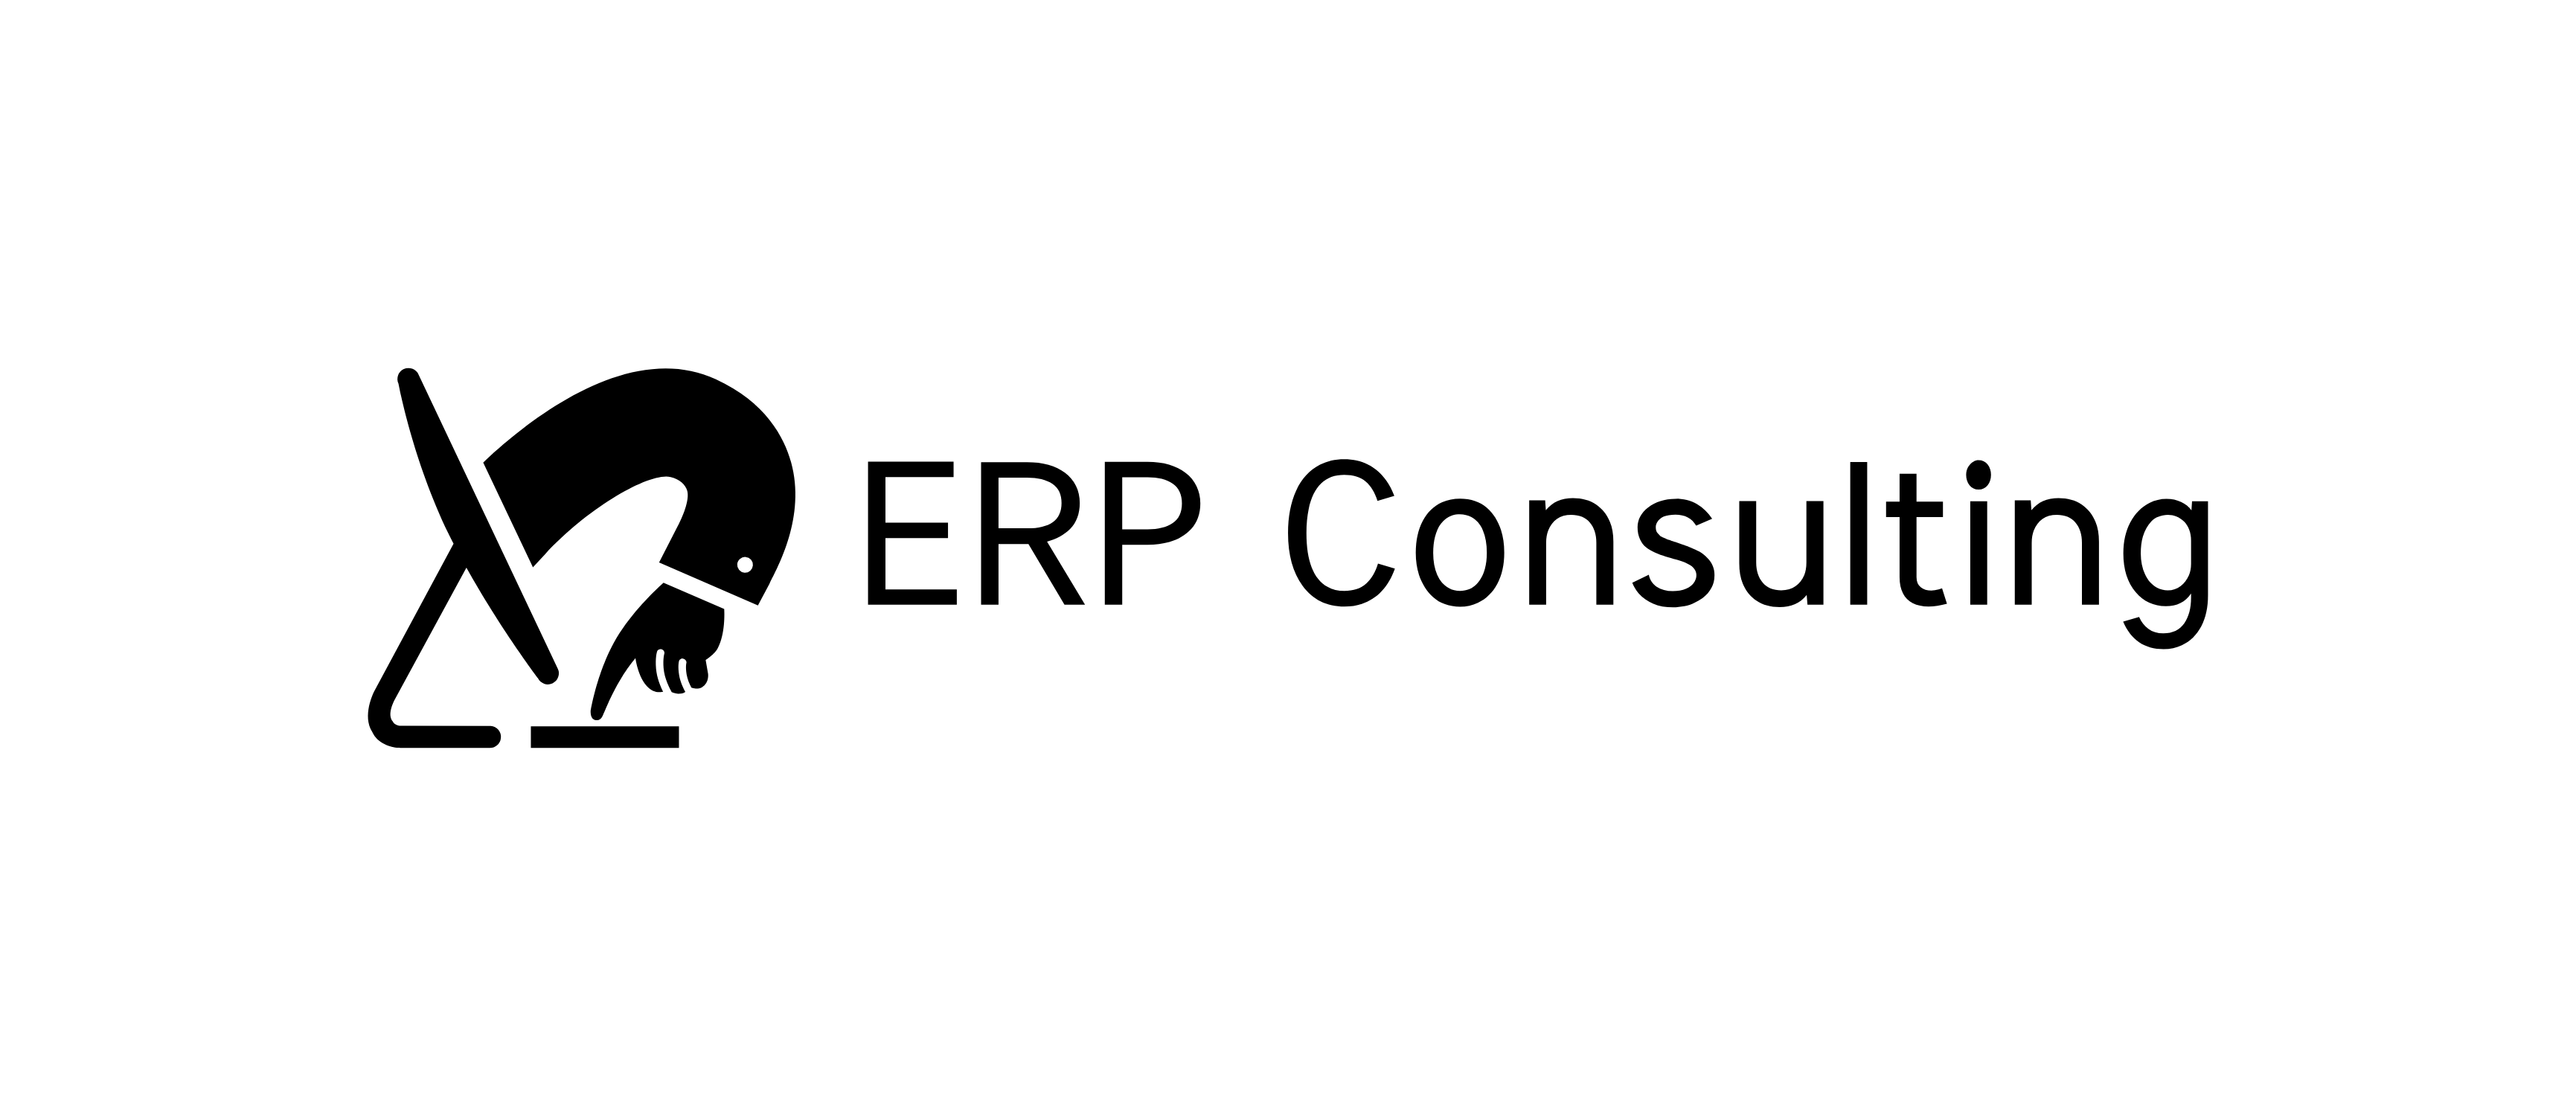 ERP Consulting Helpdesk